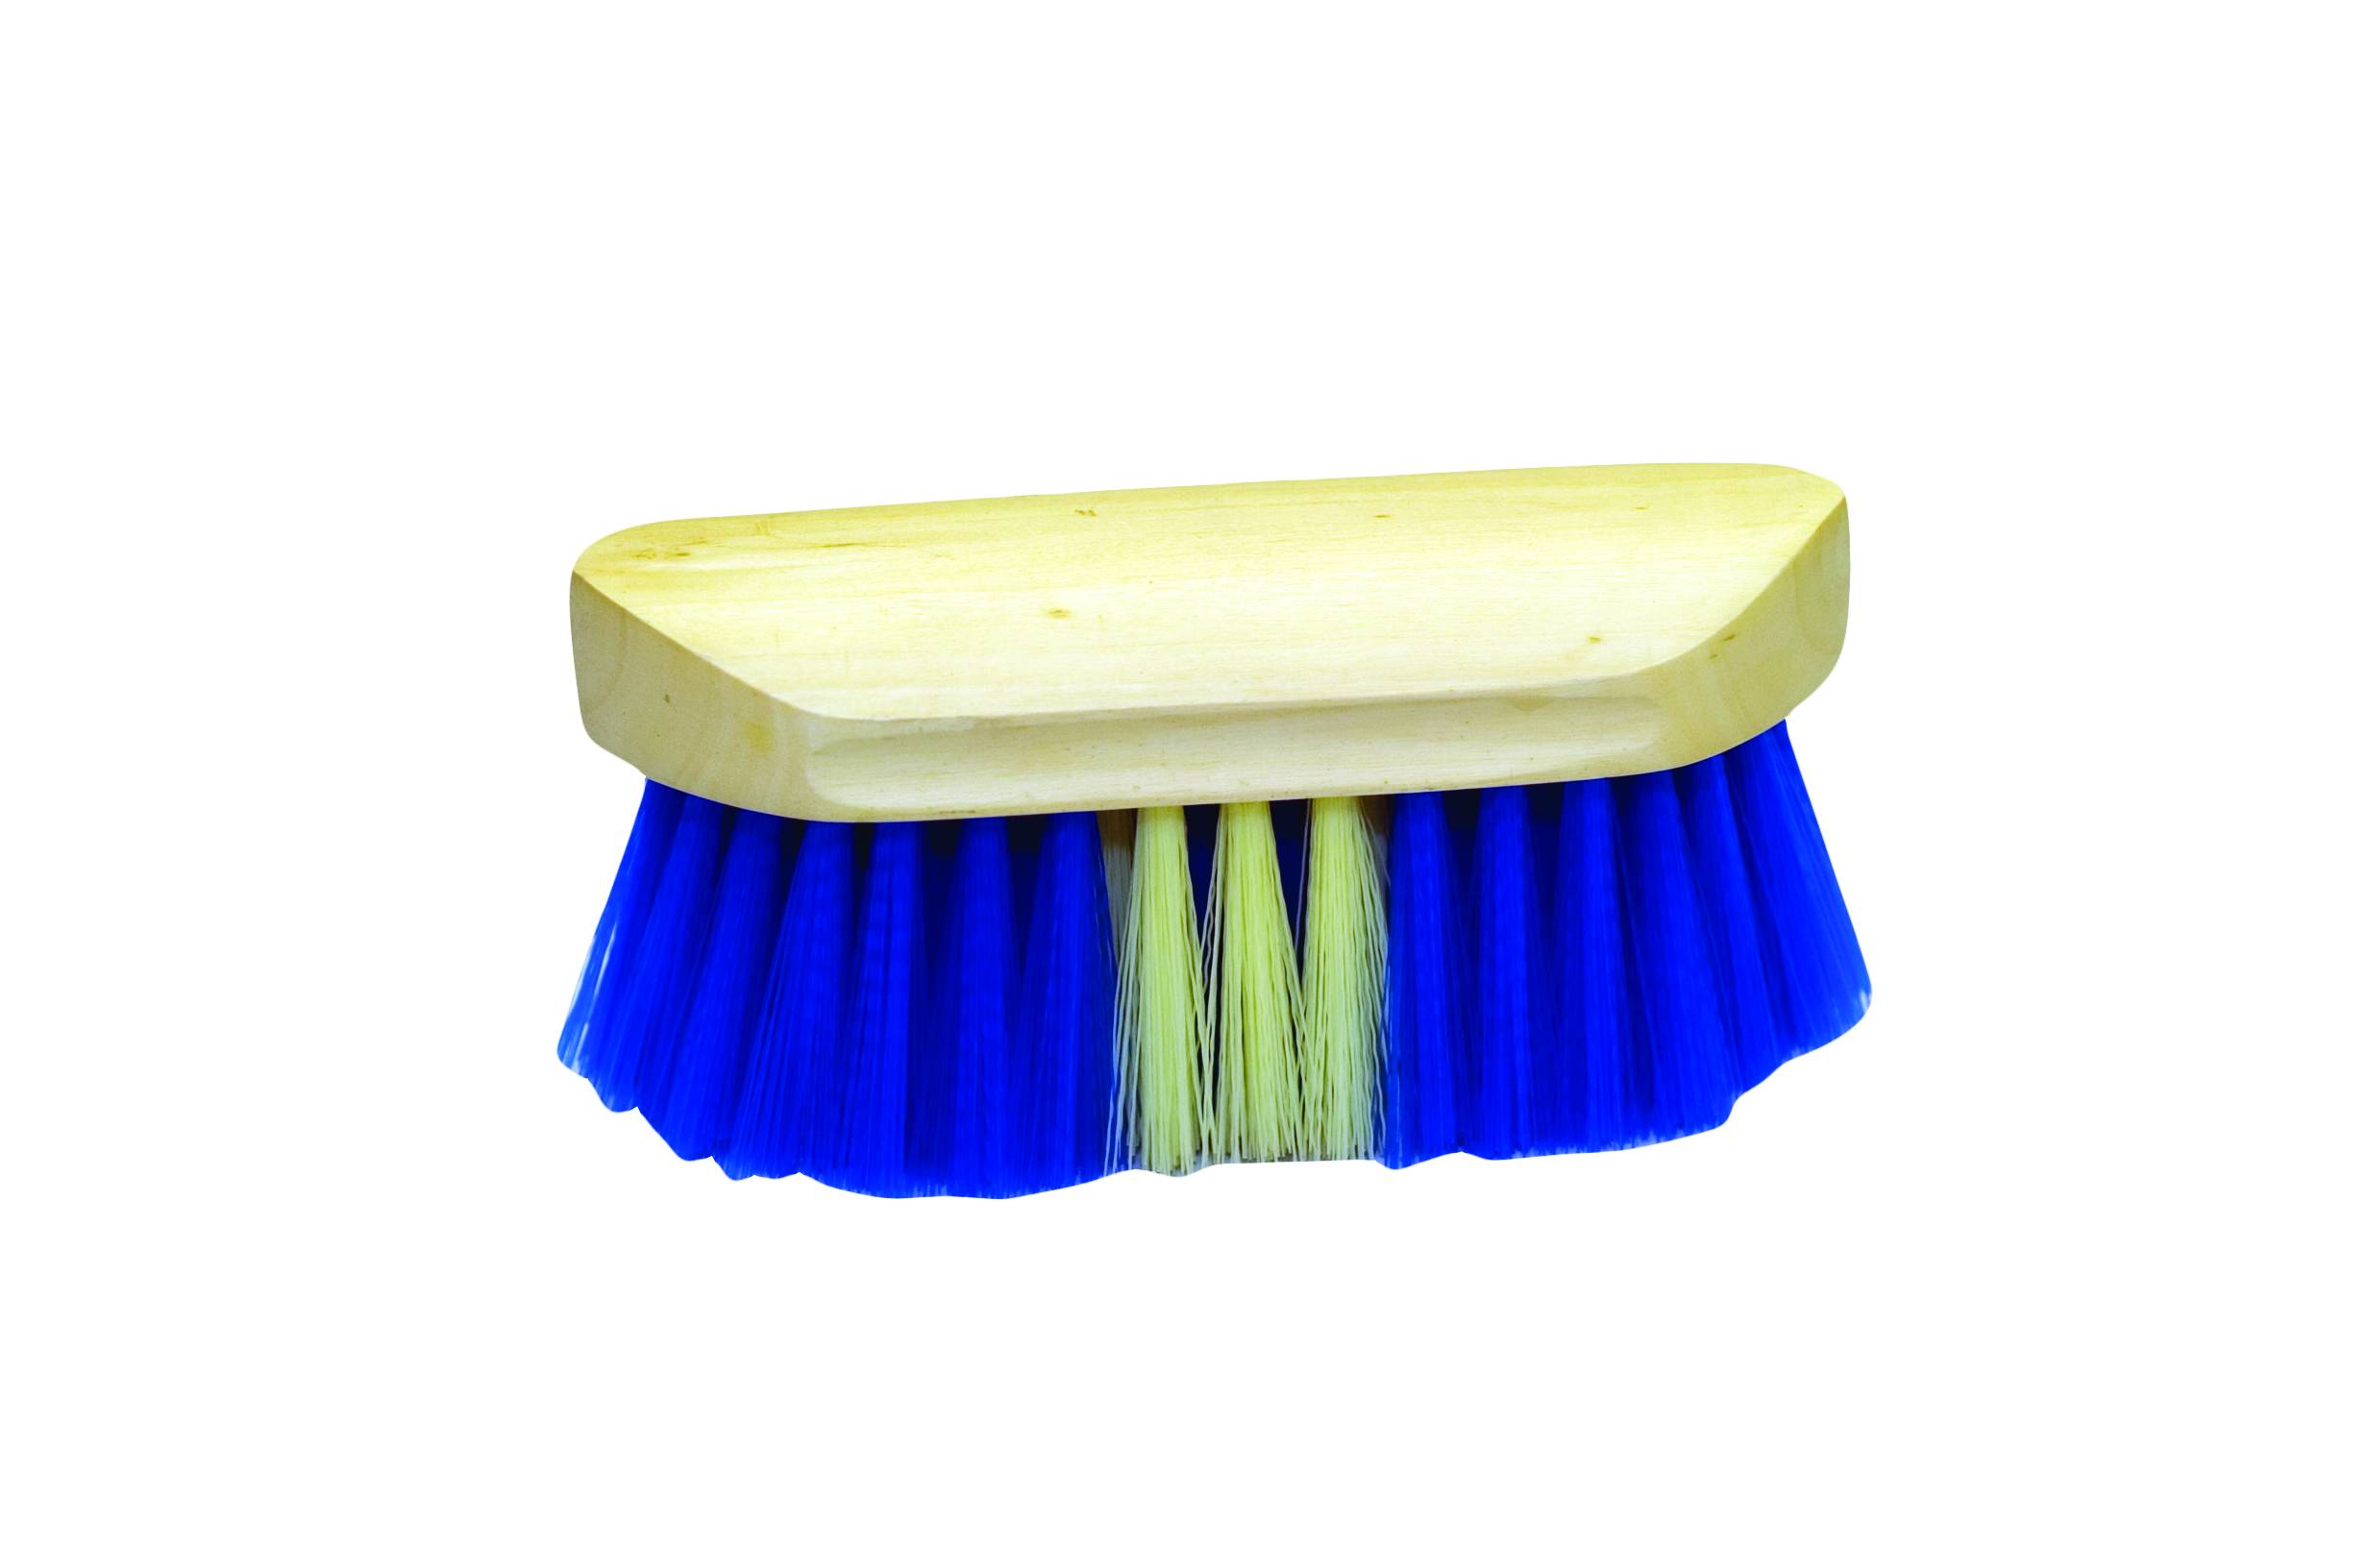 Partrade ~Two Tone Dandy Brush with Soft Bristles Assorted Colors Box of 12 6.5" 